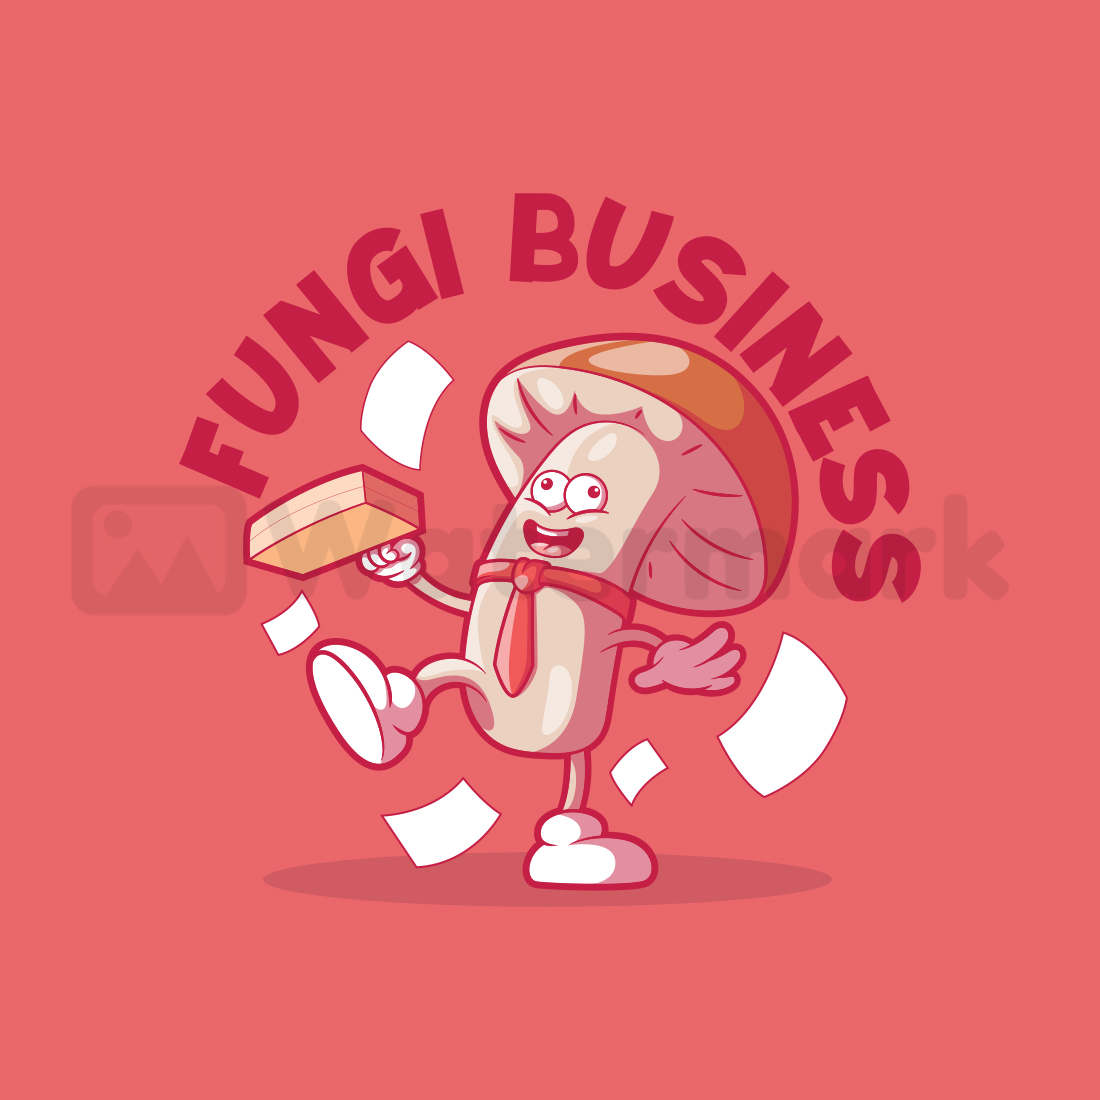 Fungi Business! preview image.